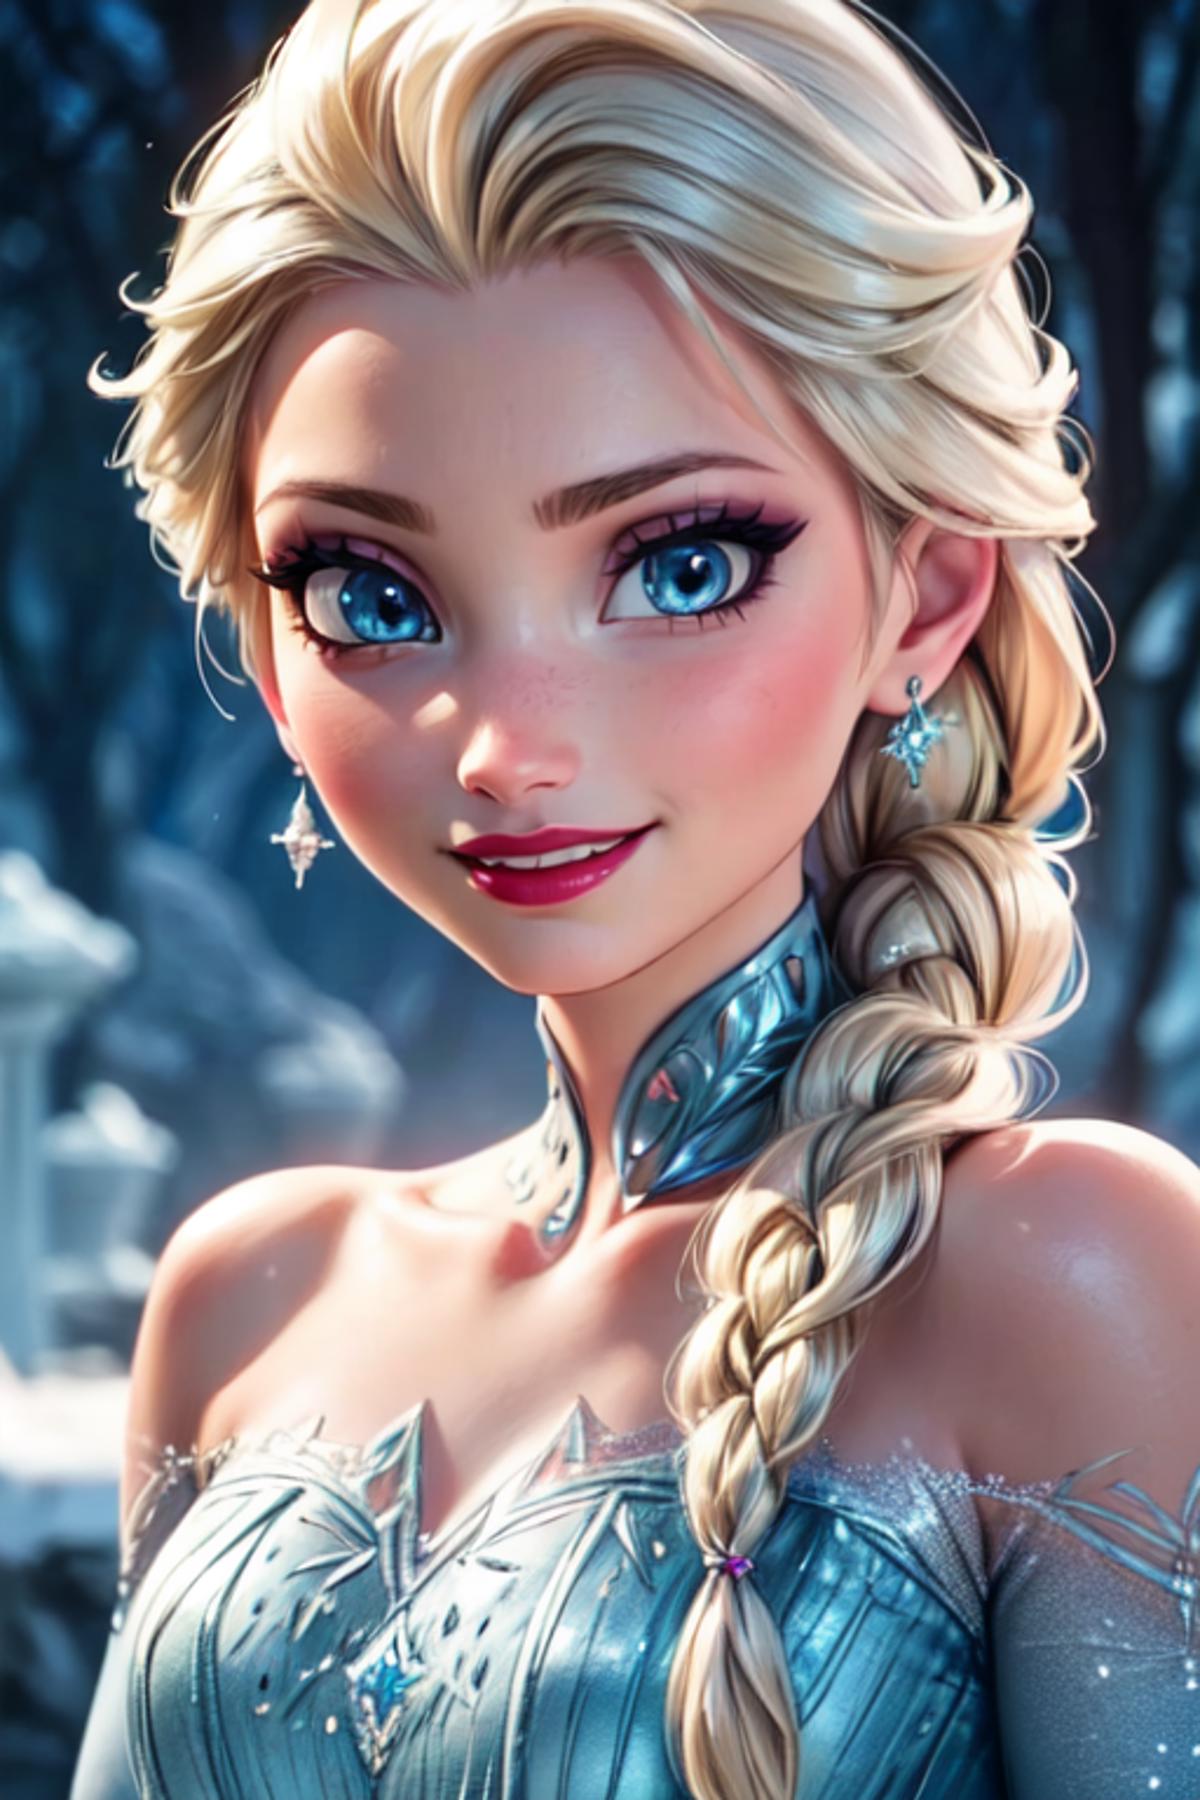 Elsa (Frozen) Disney Princess, by YeiyeiArt - v1.0, Stable Diffusion LoRA